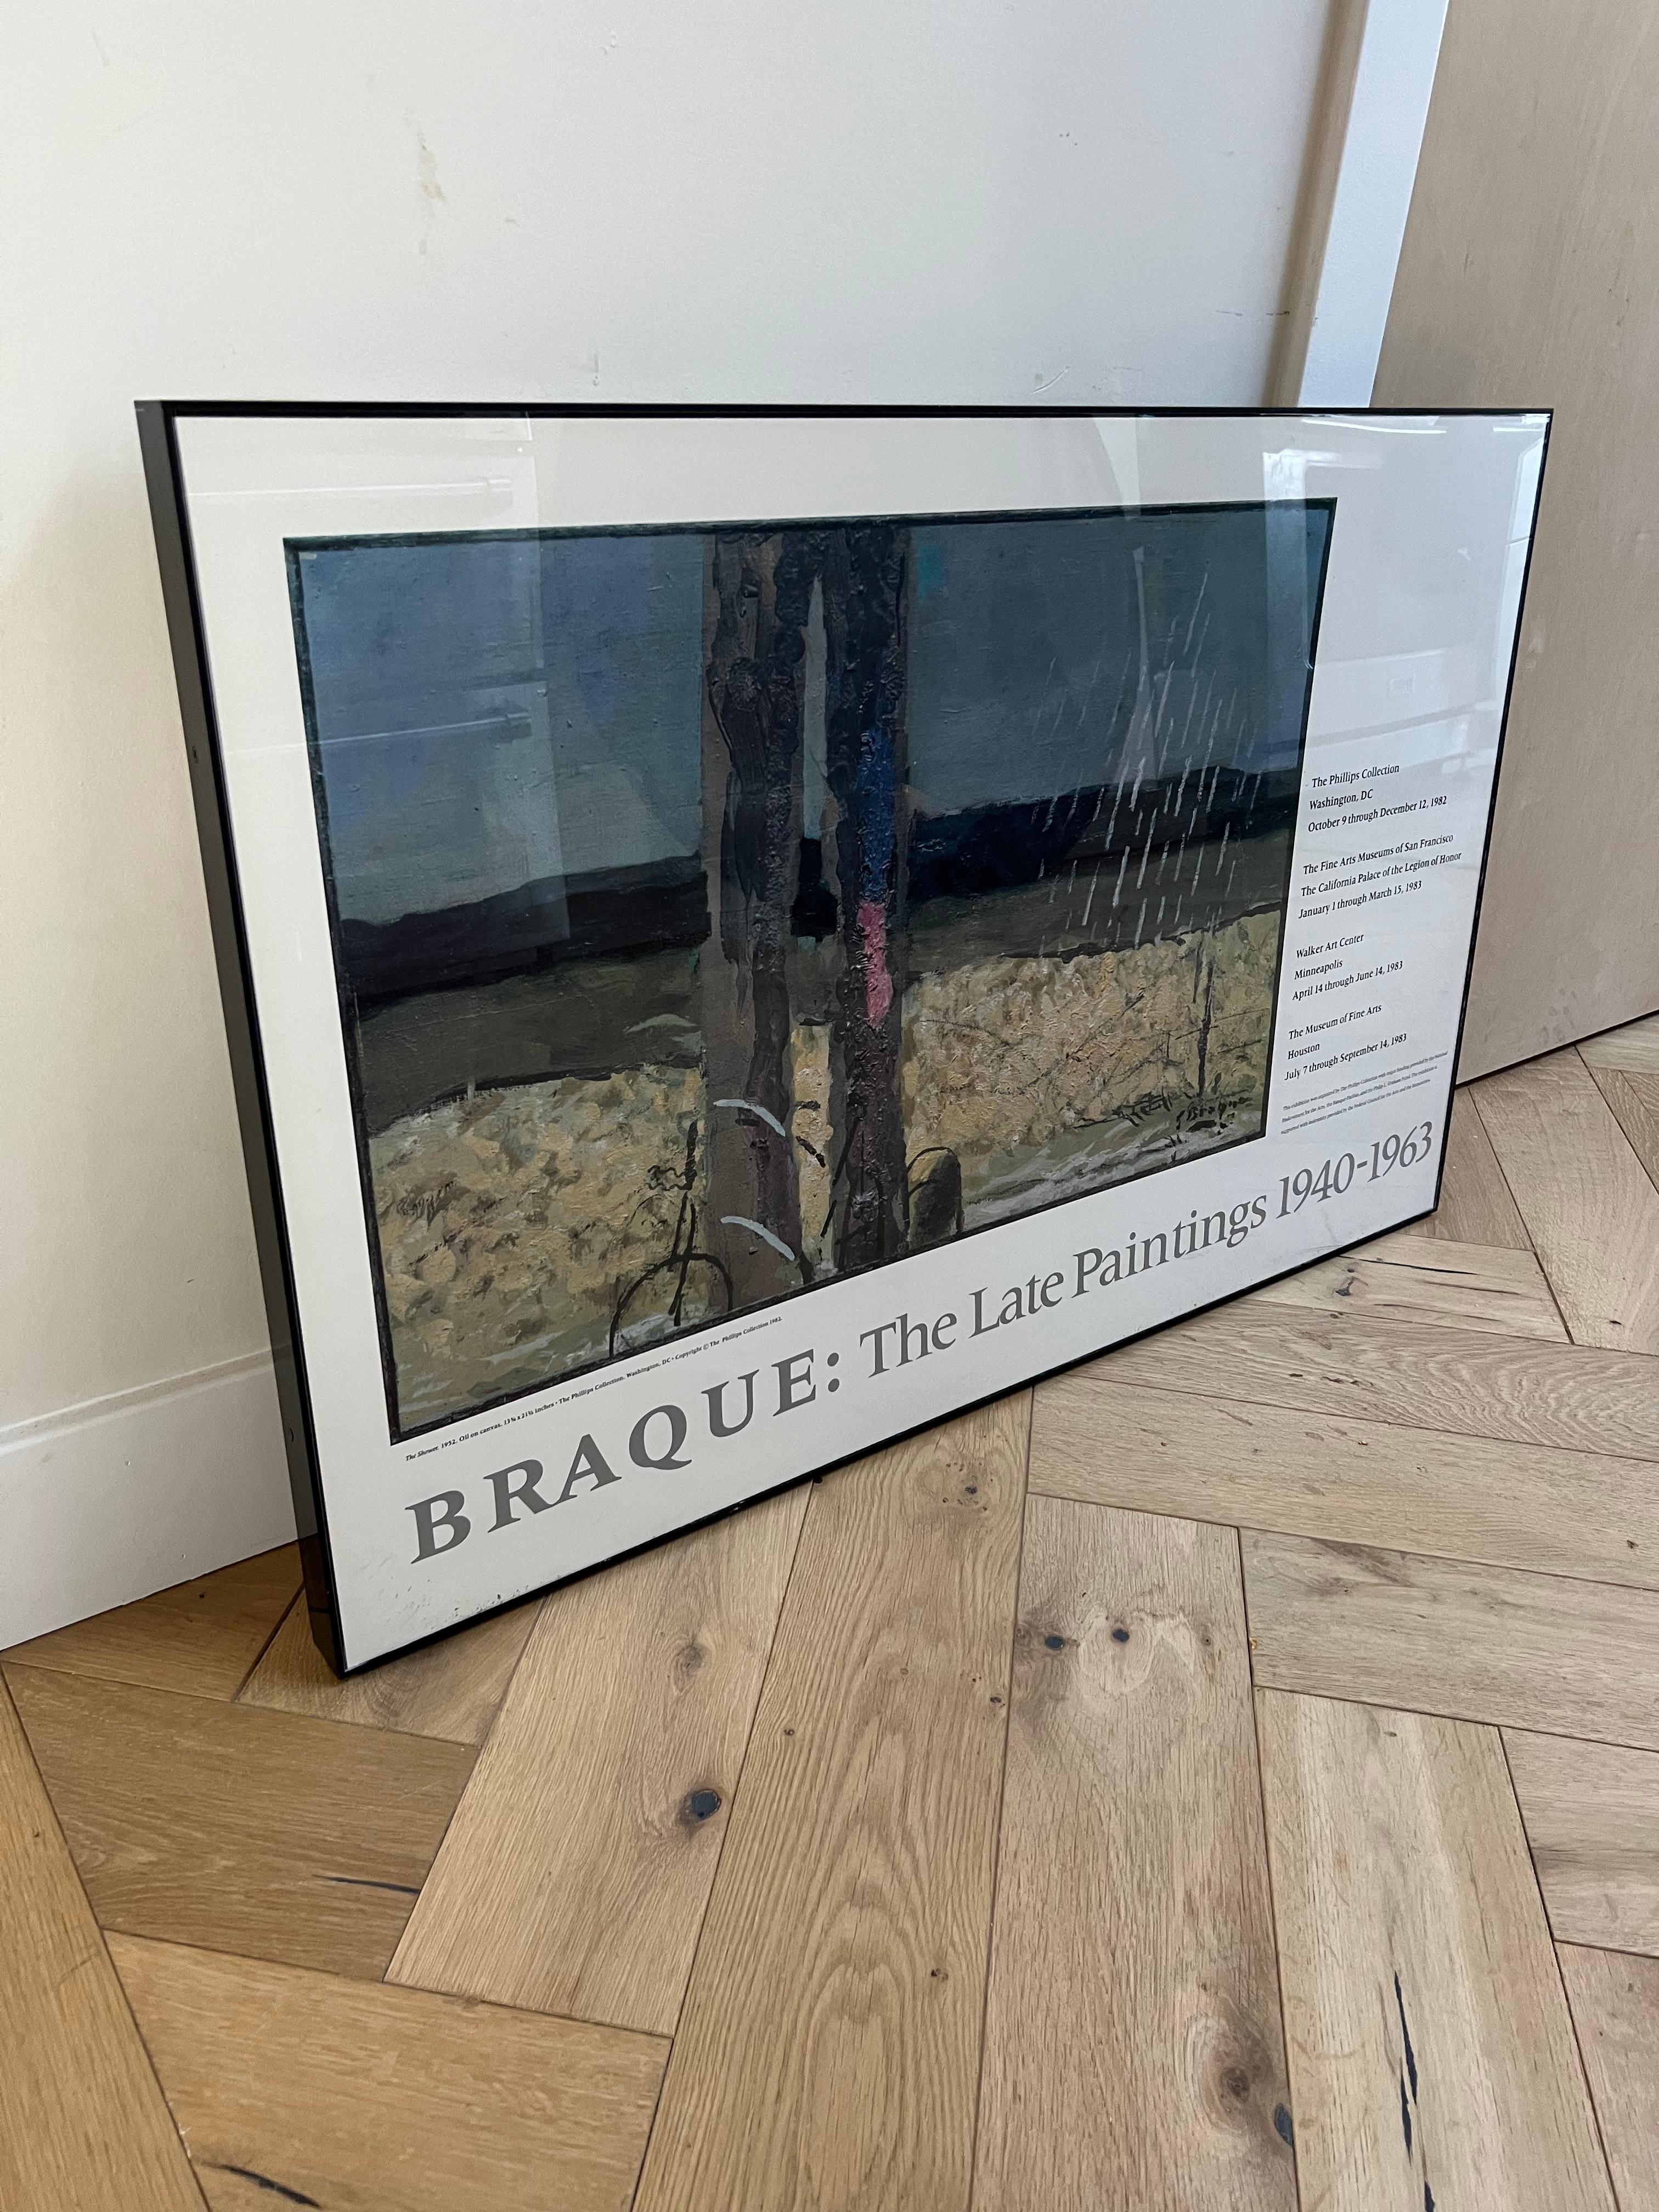 A vintage exhibition poster for a Braque show which toured through several museums: “Braque: the late paintings 1940-1963”. Framed in an ebonized titanium frame and behind glass. Featuring his work “The Shower”, oil on canvas, 1952.